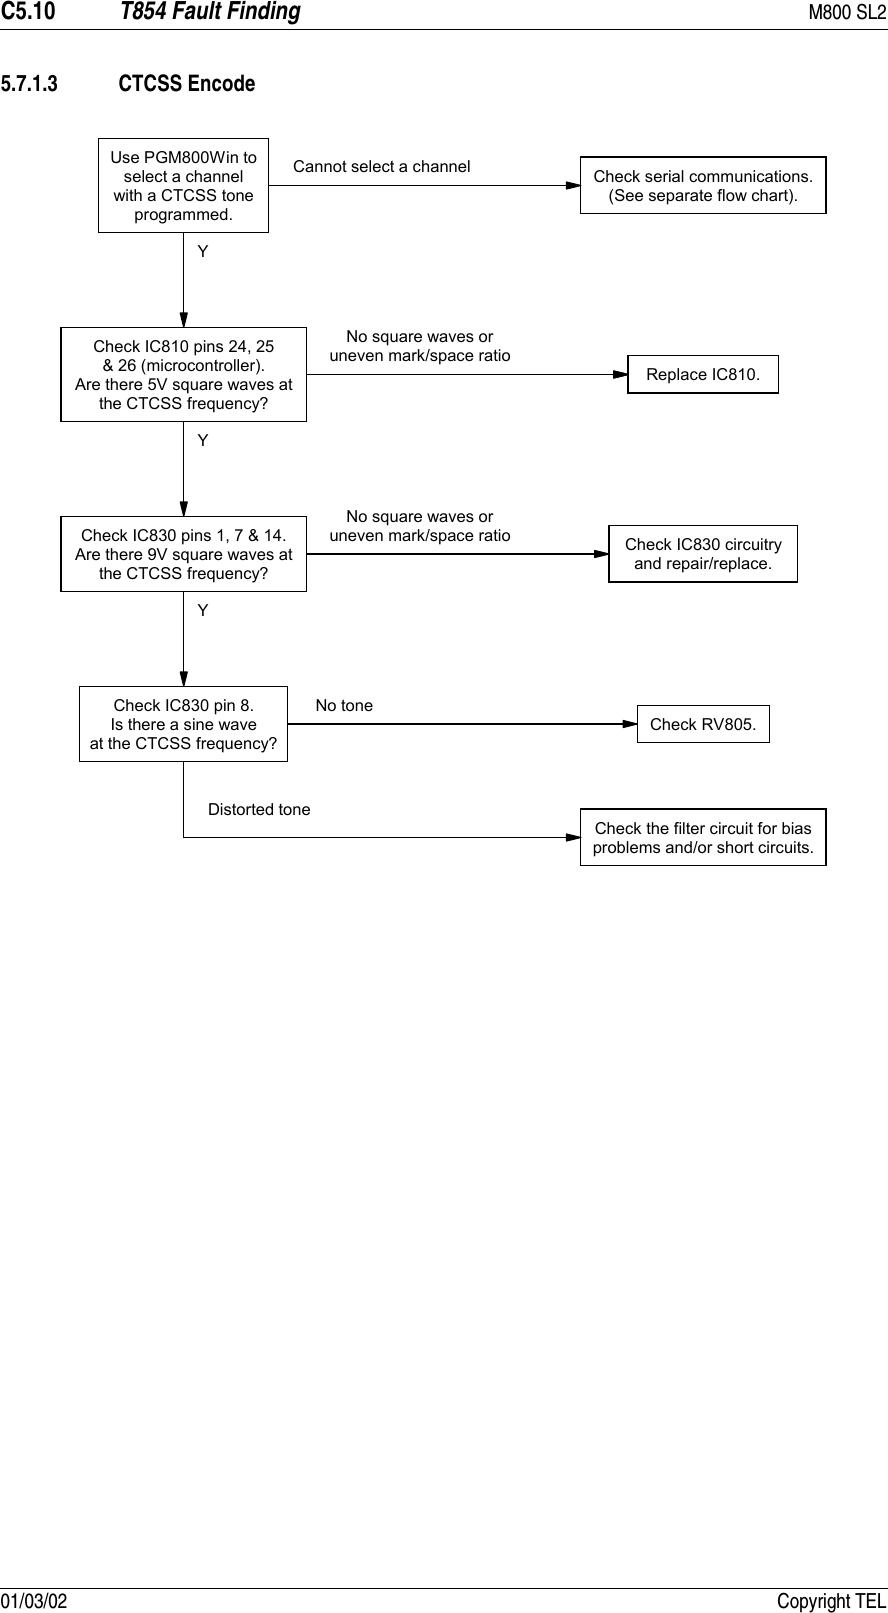 C5.10 T854 Fault Finding M800 SL201/03/02 Copyright TEL5.7.1.3 CTCSS EncodeYYYReplace IC810.Use PGM800Win toselect a channelwith a CTCSS toneprogrammed.Check serial communications.(See separate flow chart).Cannot select a channelCheck IC810 pins 24, 25&amp; 26 (microcontroller).Are there 5V square waves atthe CTCSS frequency?Check IC830 pins 1, 7 &amp; 14.Are there 9V square waves atthe CTCSS frequency?Check IC830 pin 8.Is there a sine waveat the CTCSS frequency?Check RV805.No toneCheck the filter circuit for biasproblems and/or short circuits.Distorted toneNo square waves oruneven mark/space ratioNo square waves oruneven mark/space ratio Check IC830 circuitryand repair/replace.